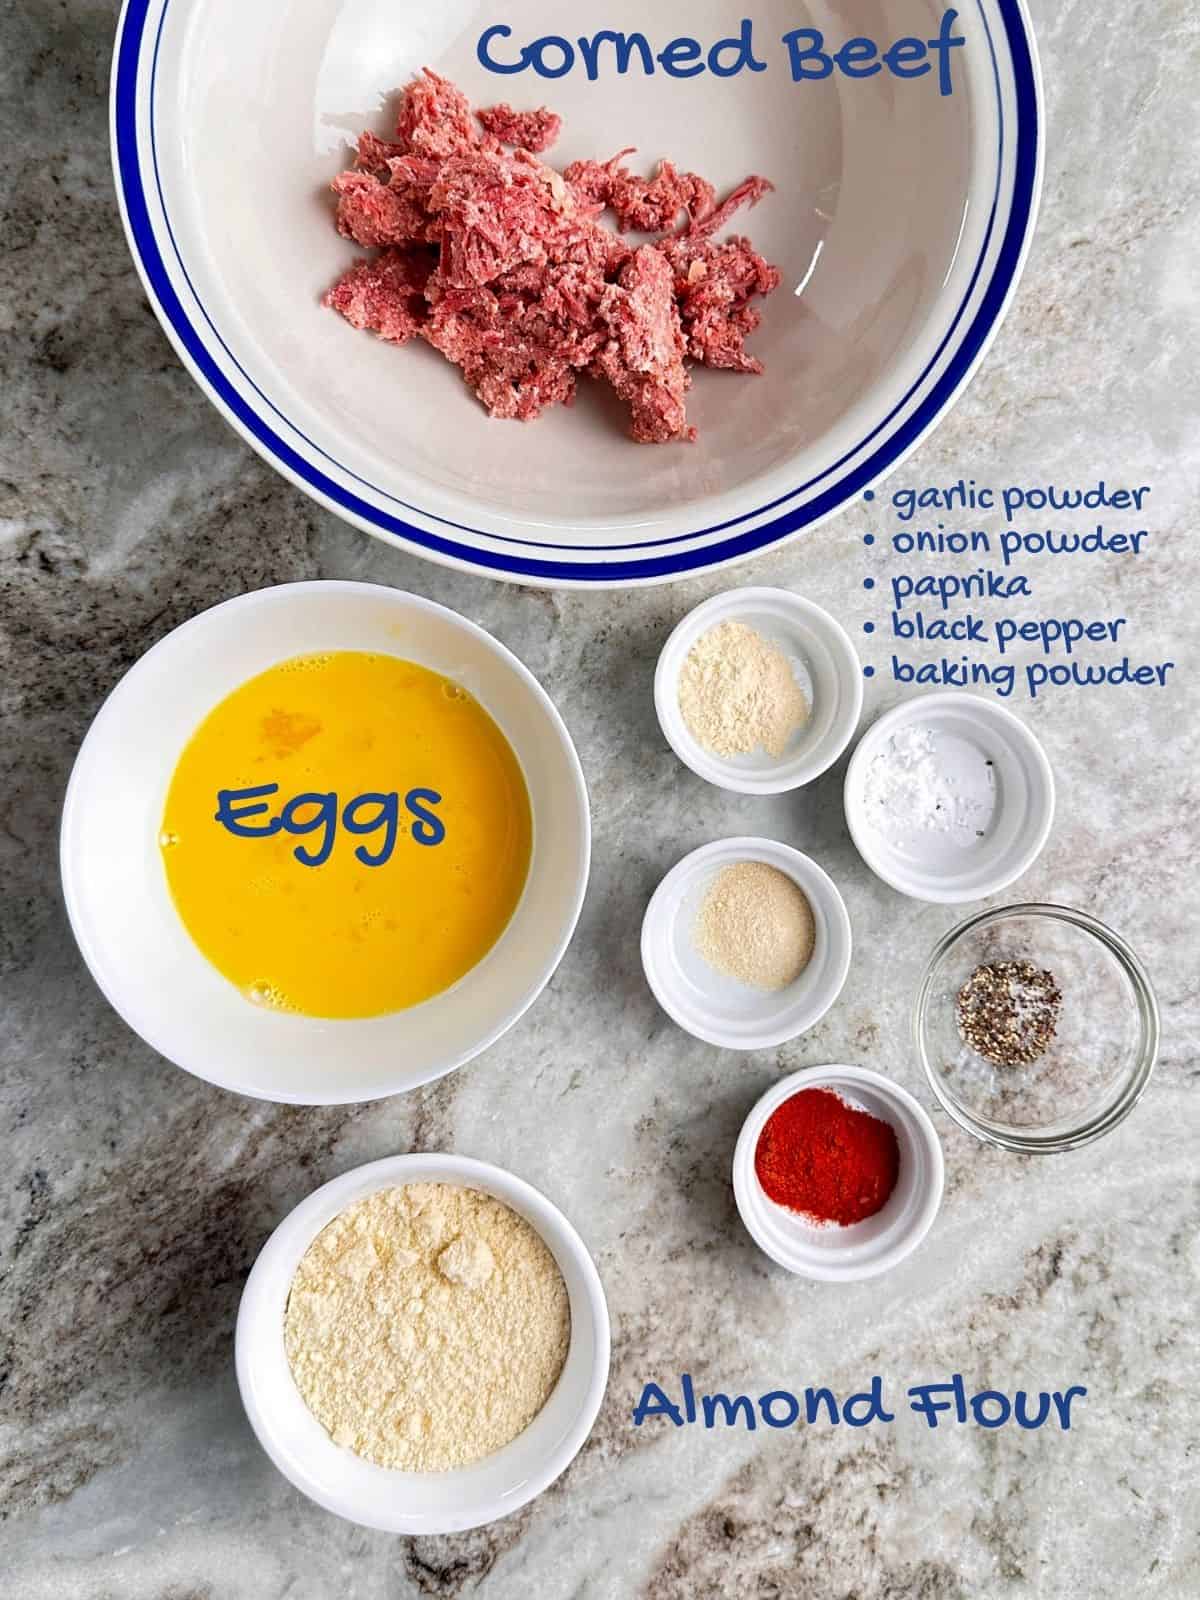 image of ingredients use for the corned beef fritters